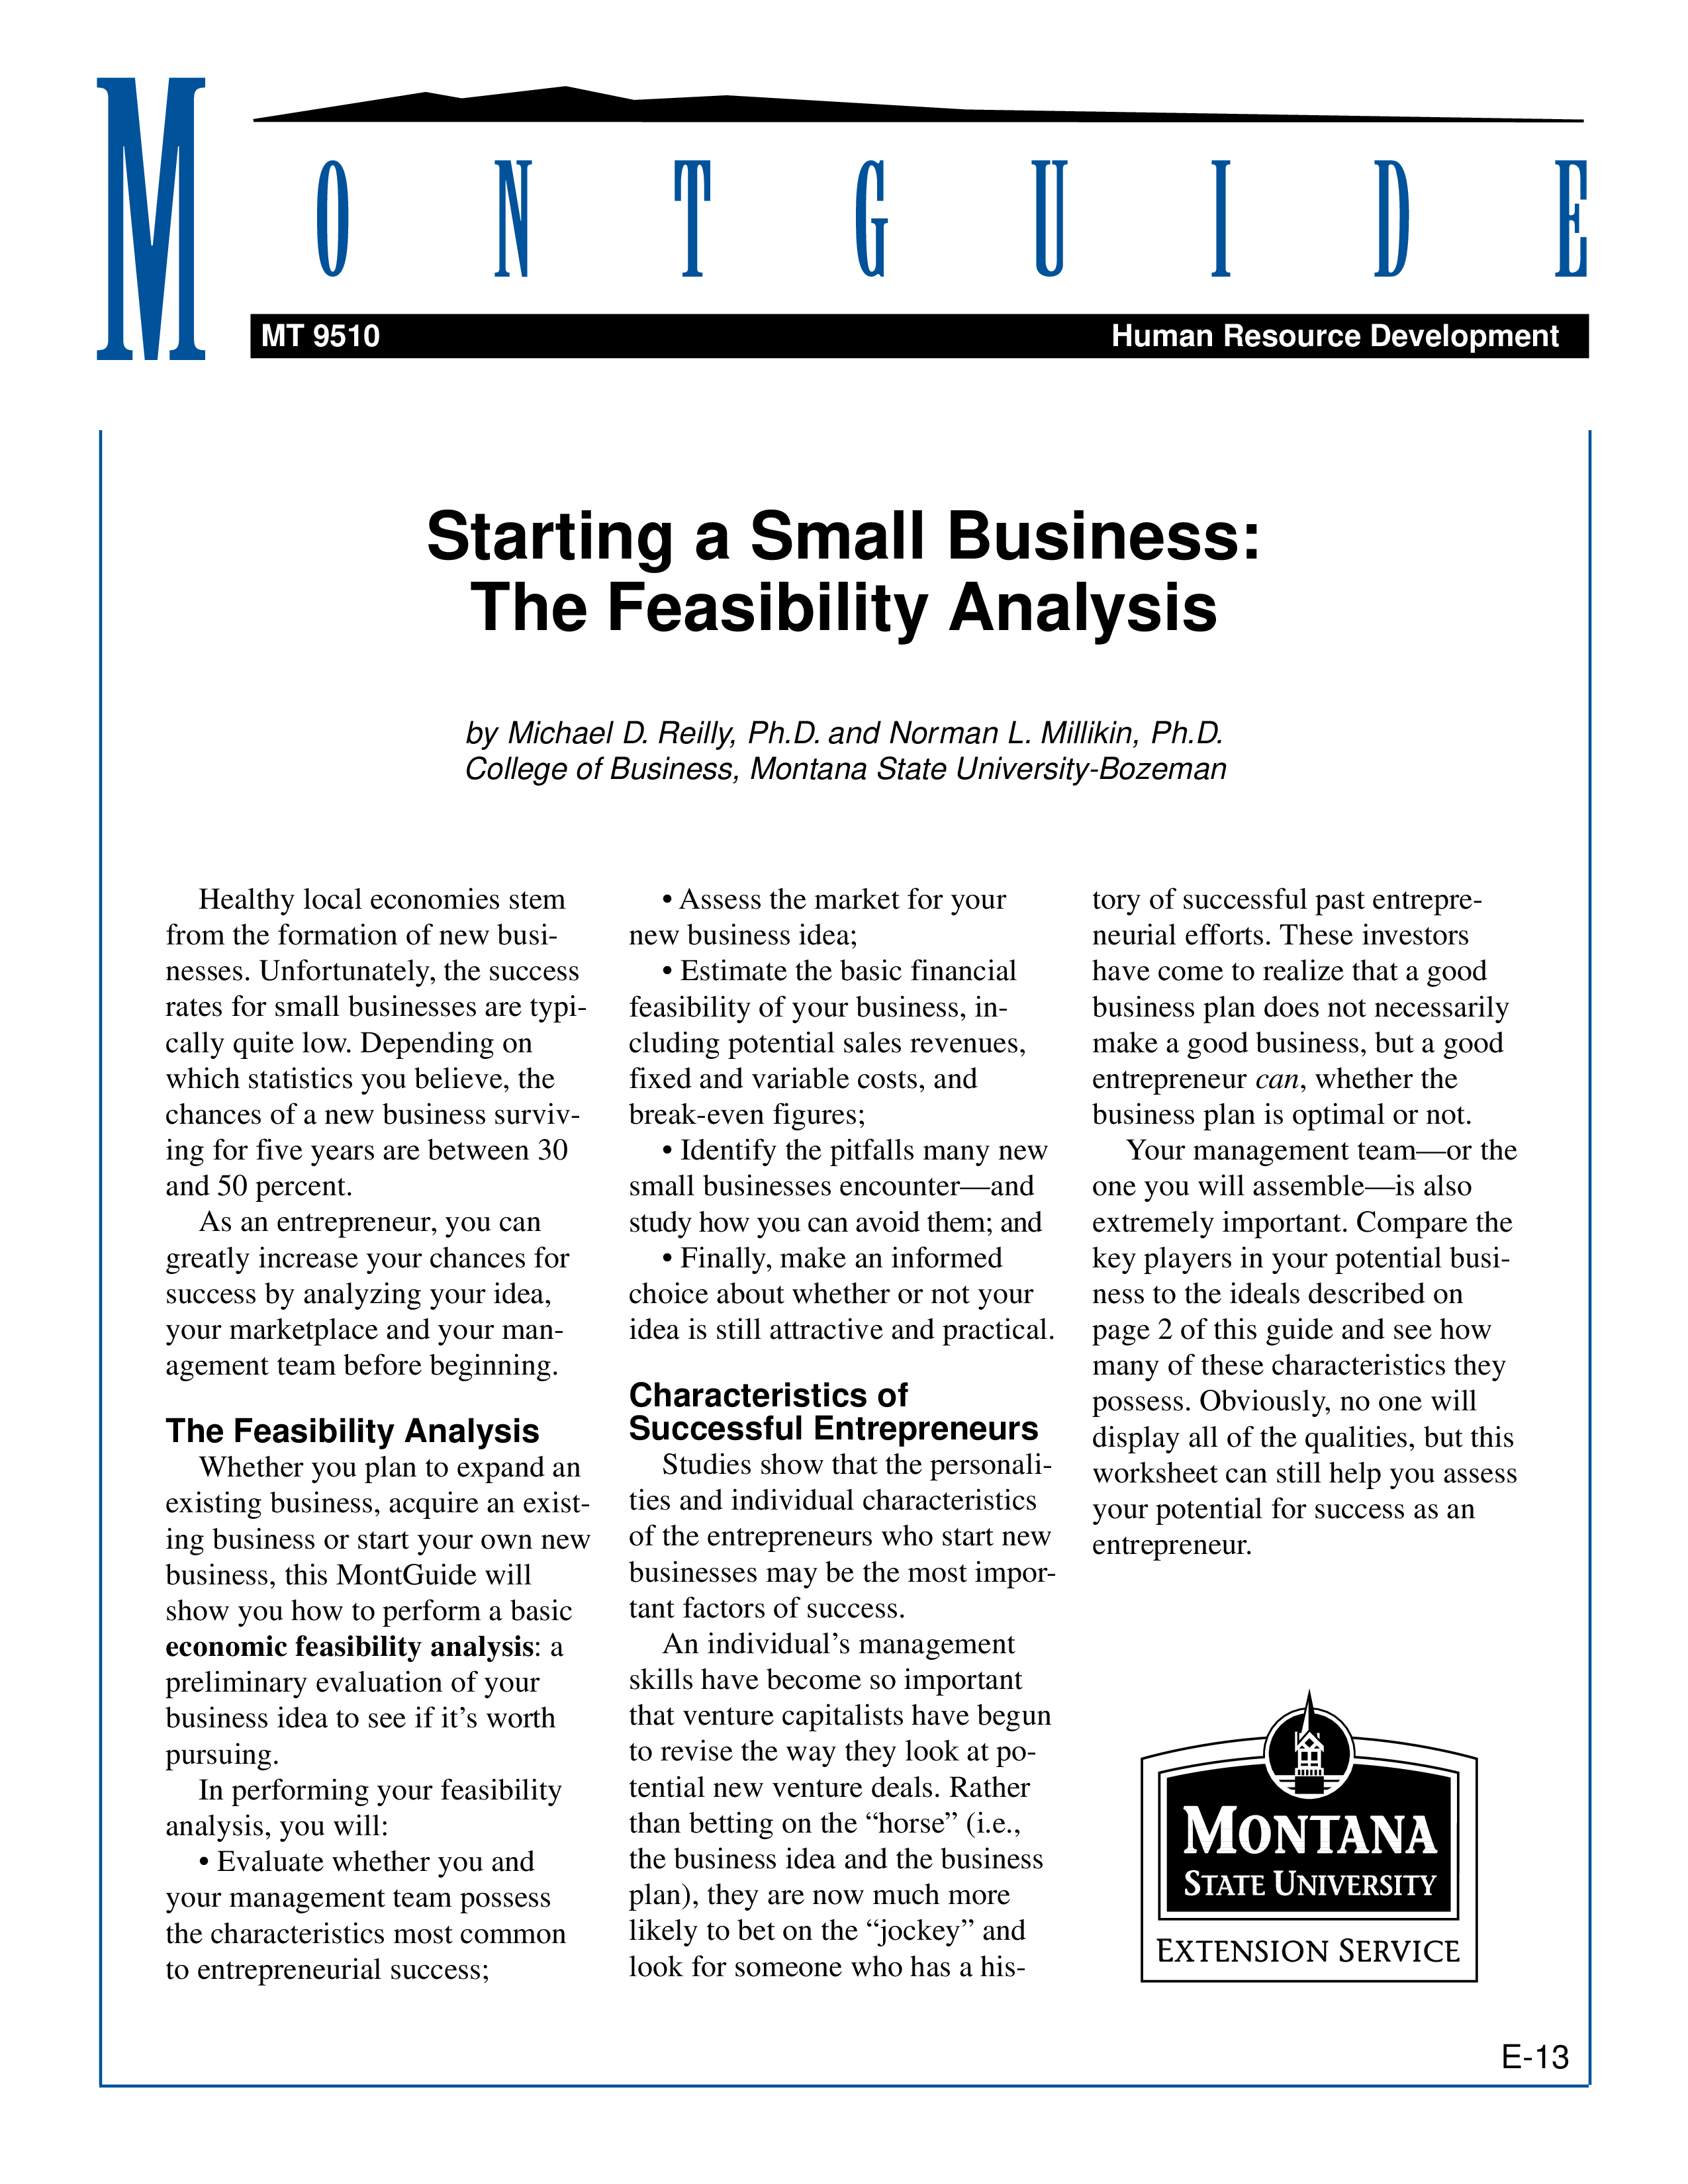 Small Business Feasibility Analysis  Templates at  With Small Business Analysis Template With Small Business Analysis Template